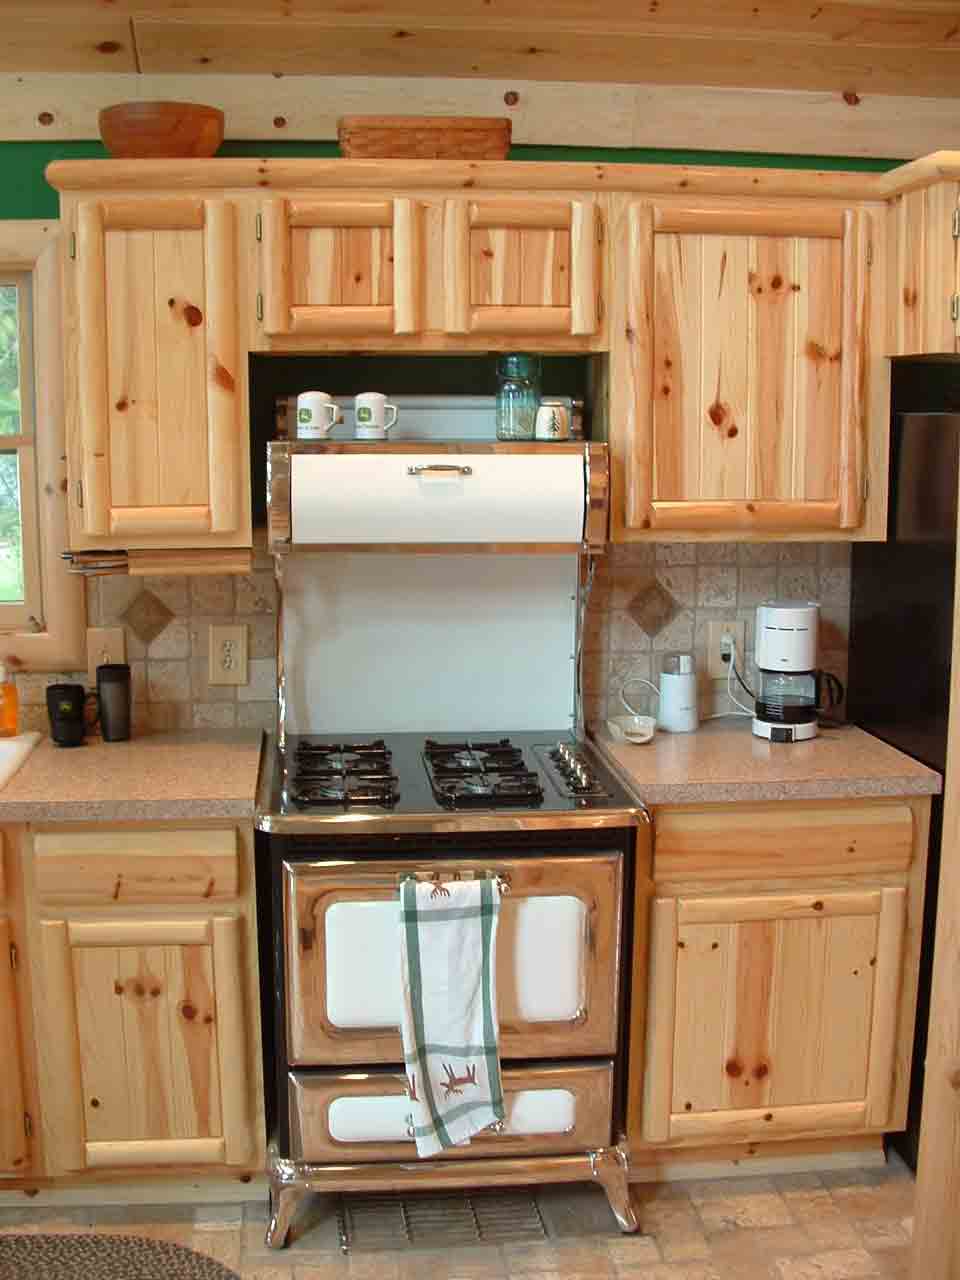 kitchen cabinetry - bathrooms and also kitchen areas|wood nation cabinets